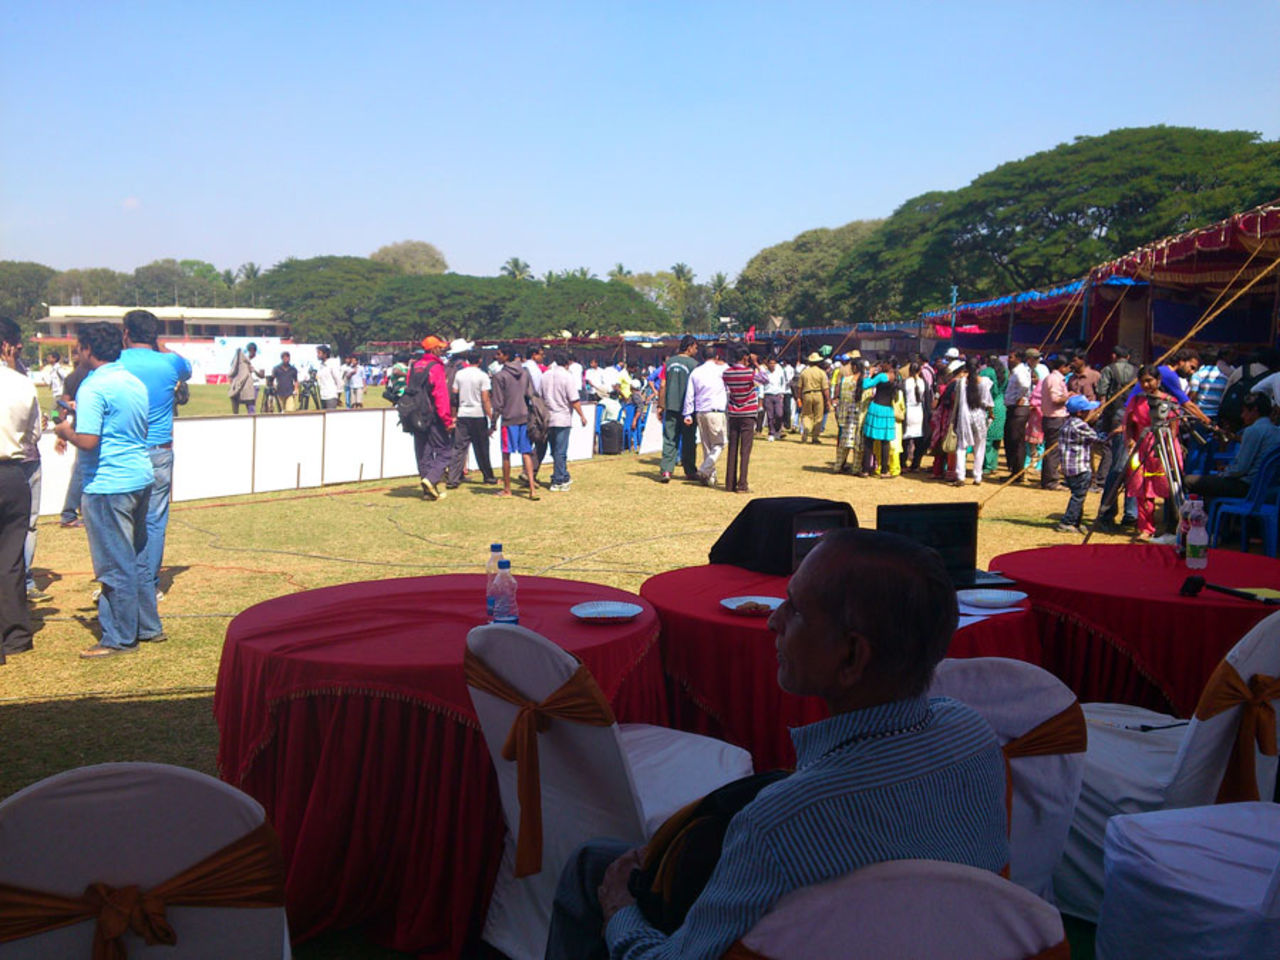 The final of the T20 World Cup for the Blind was well-attended, Bangalore, December 13, 2012